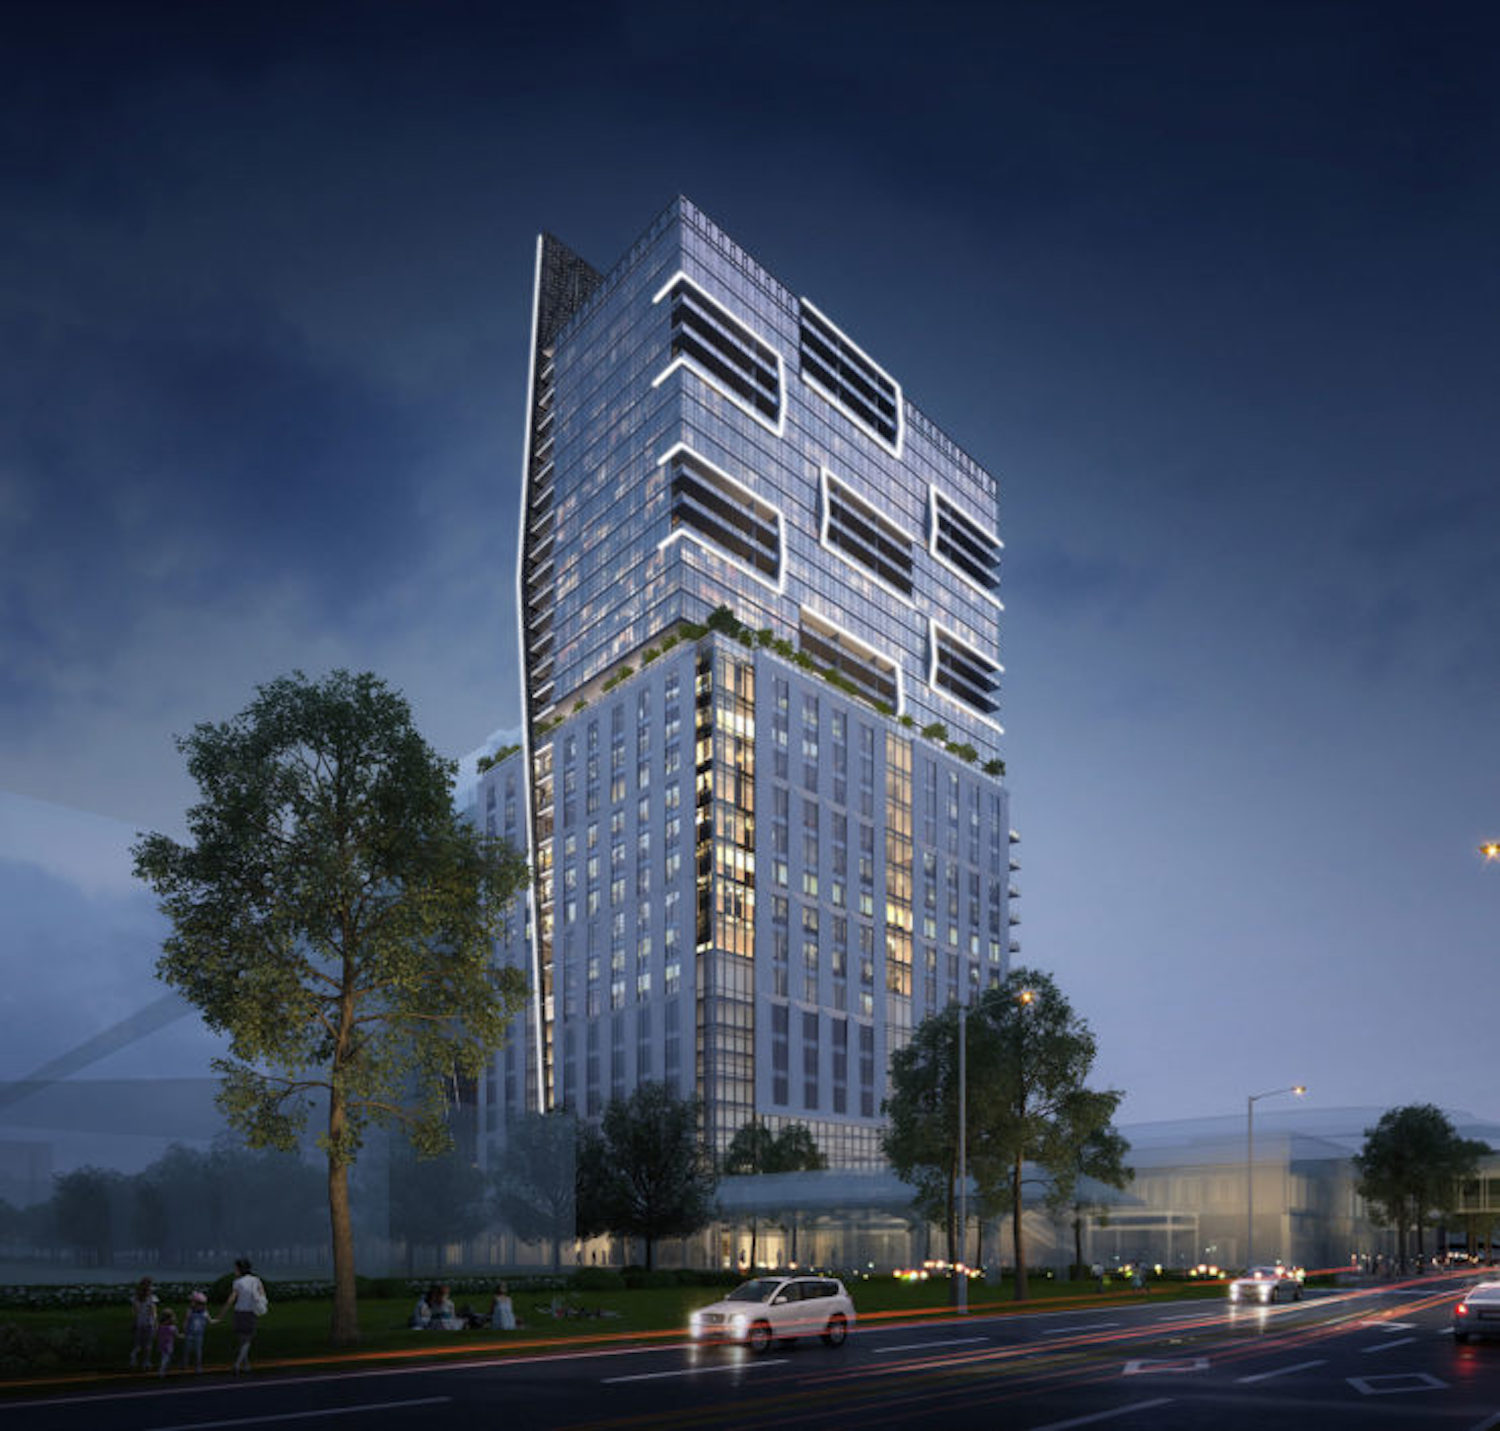 Demolition Complete For 32-Story Mixed-Use Tower At 225 S. Garland ...